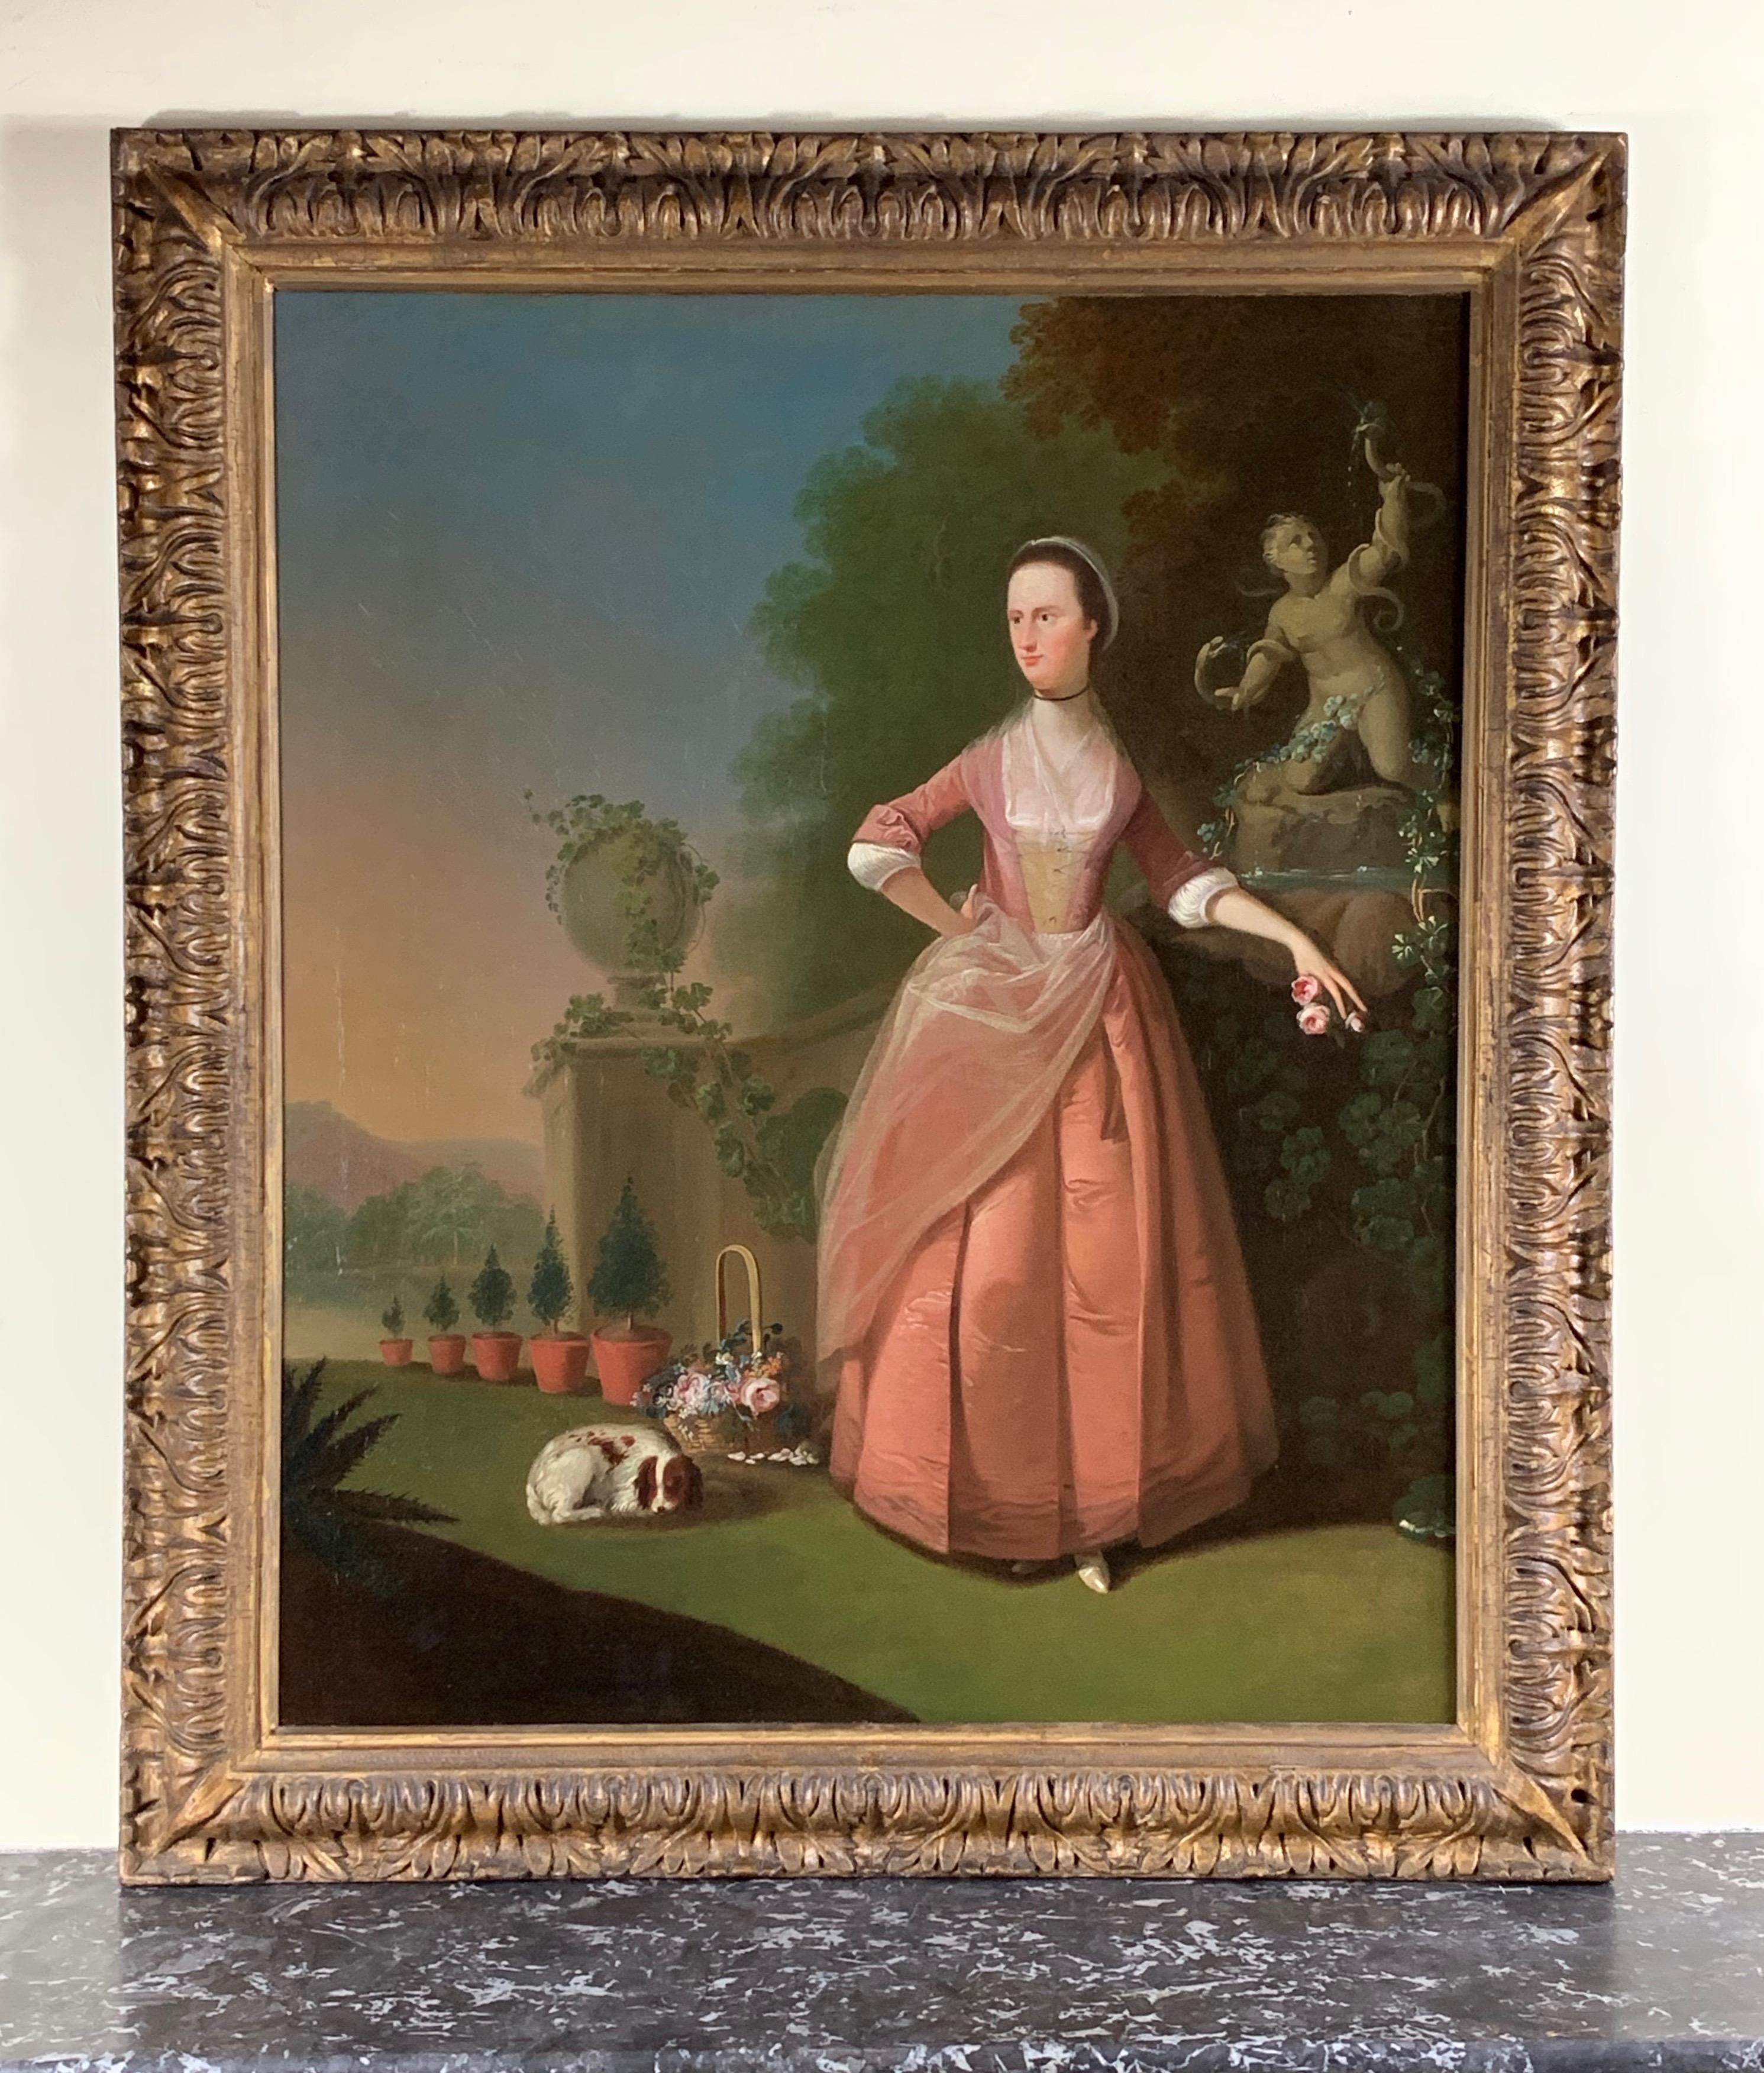 18th Century English Lady with her Dog in a Flower Garden, Wearing a Pink Dress  3